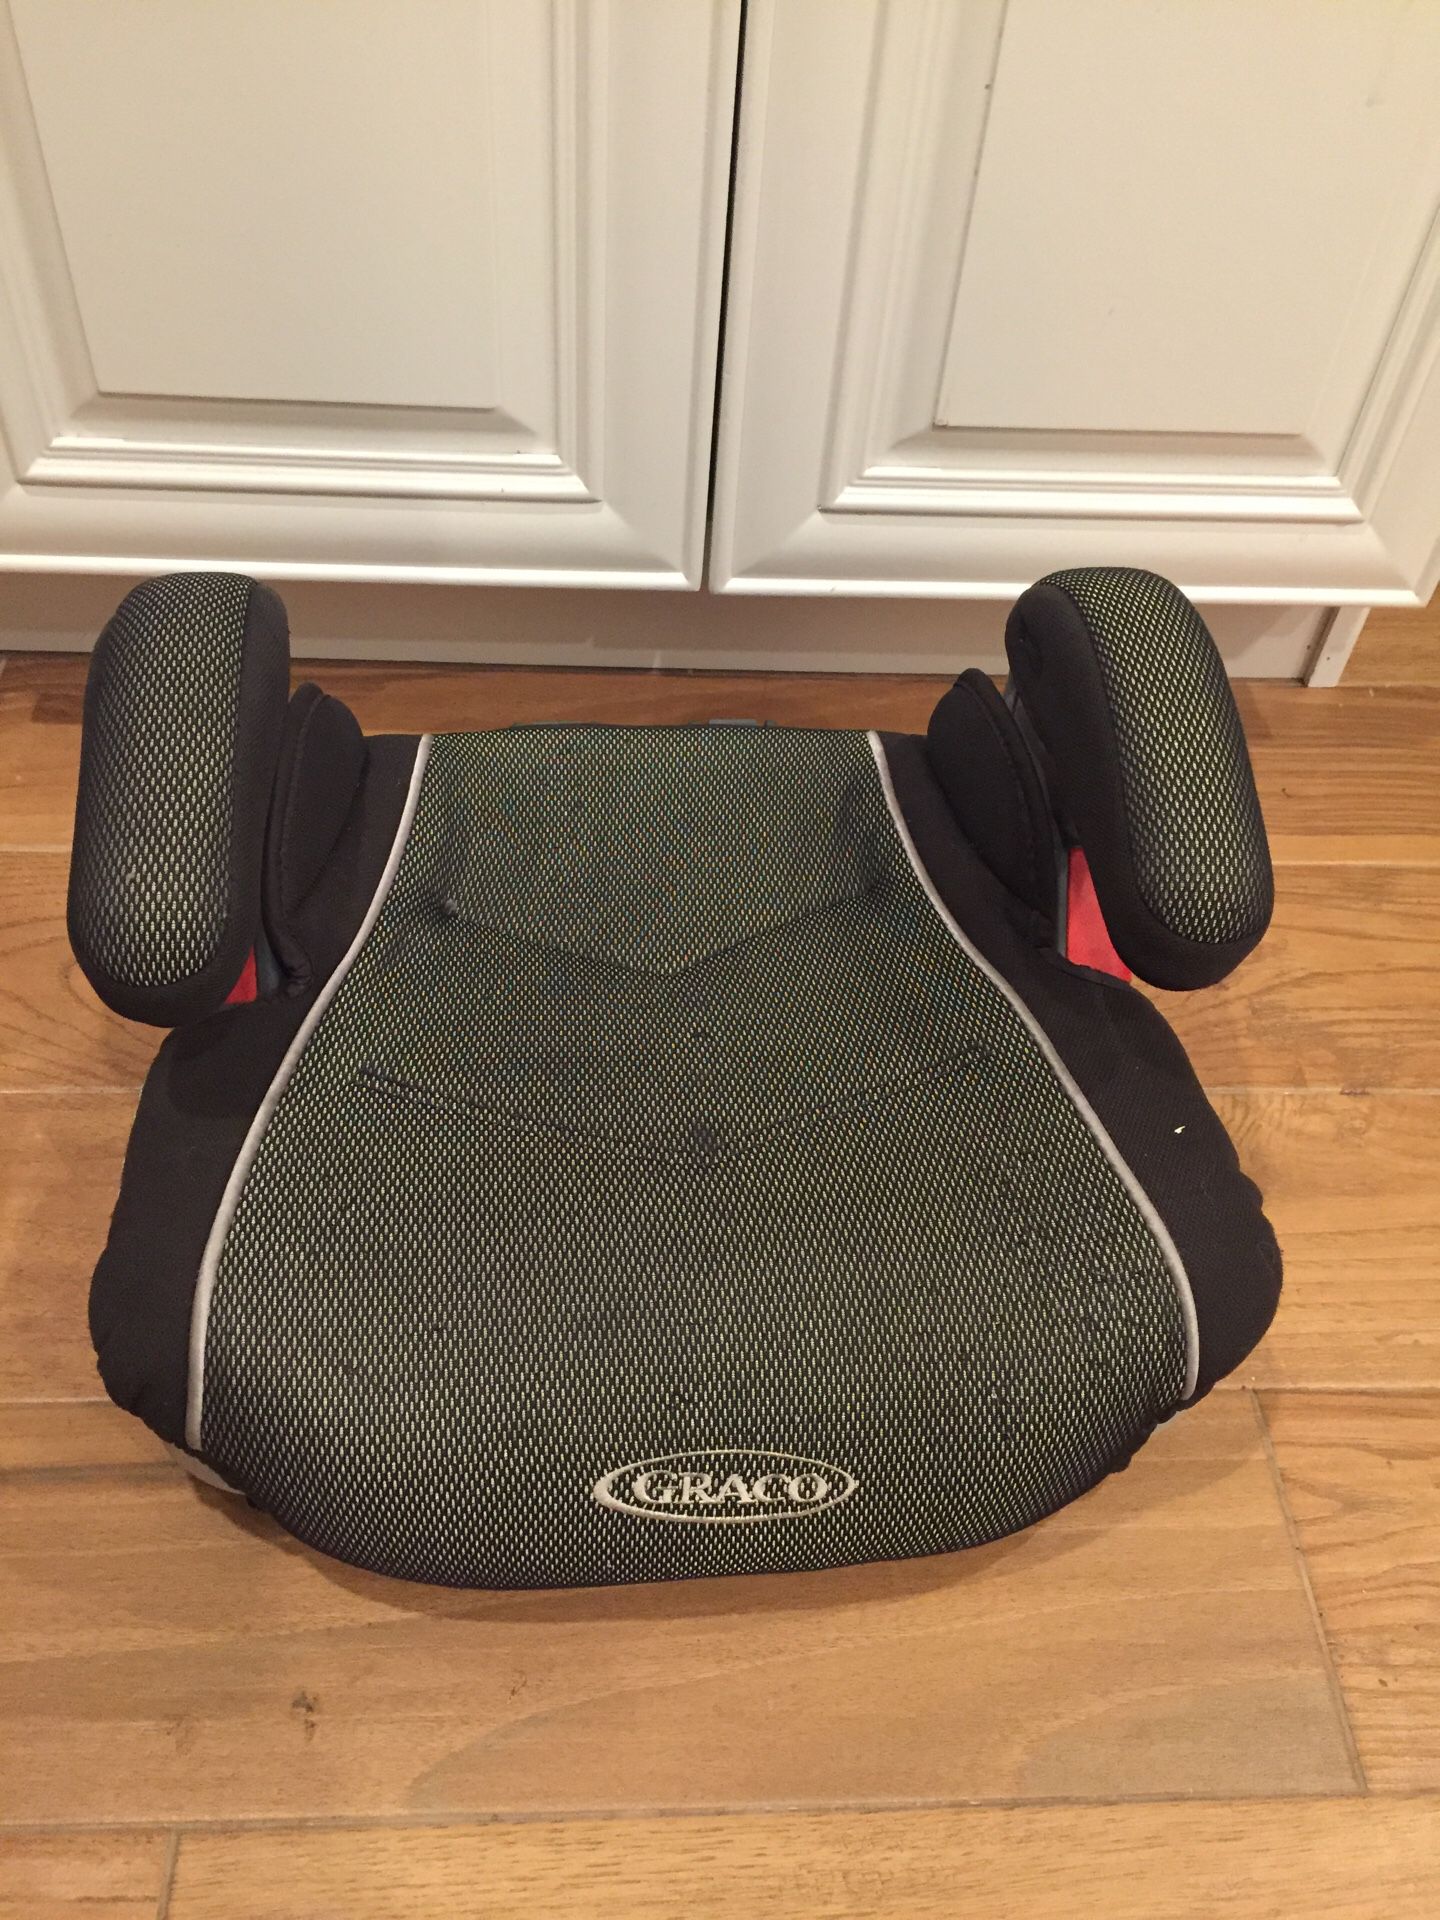 Graco child car seat booster